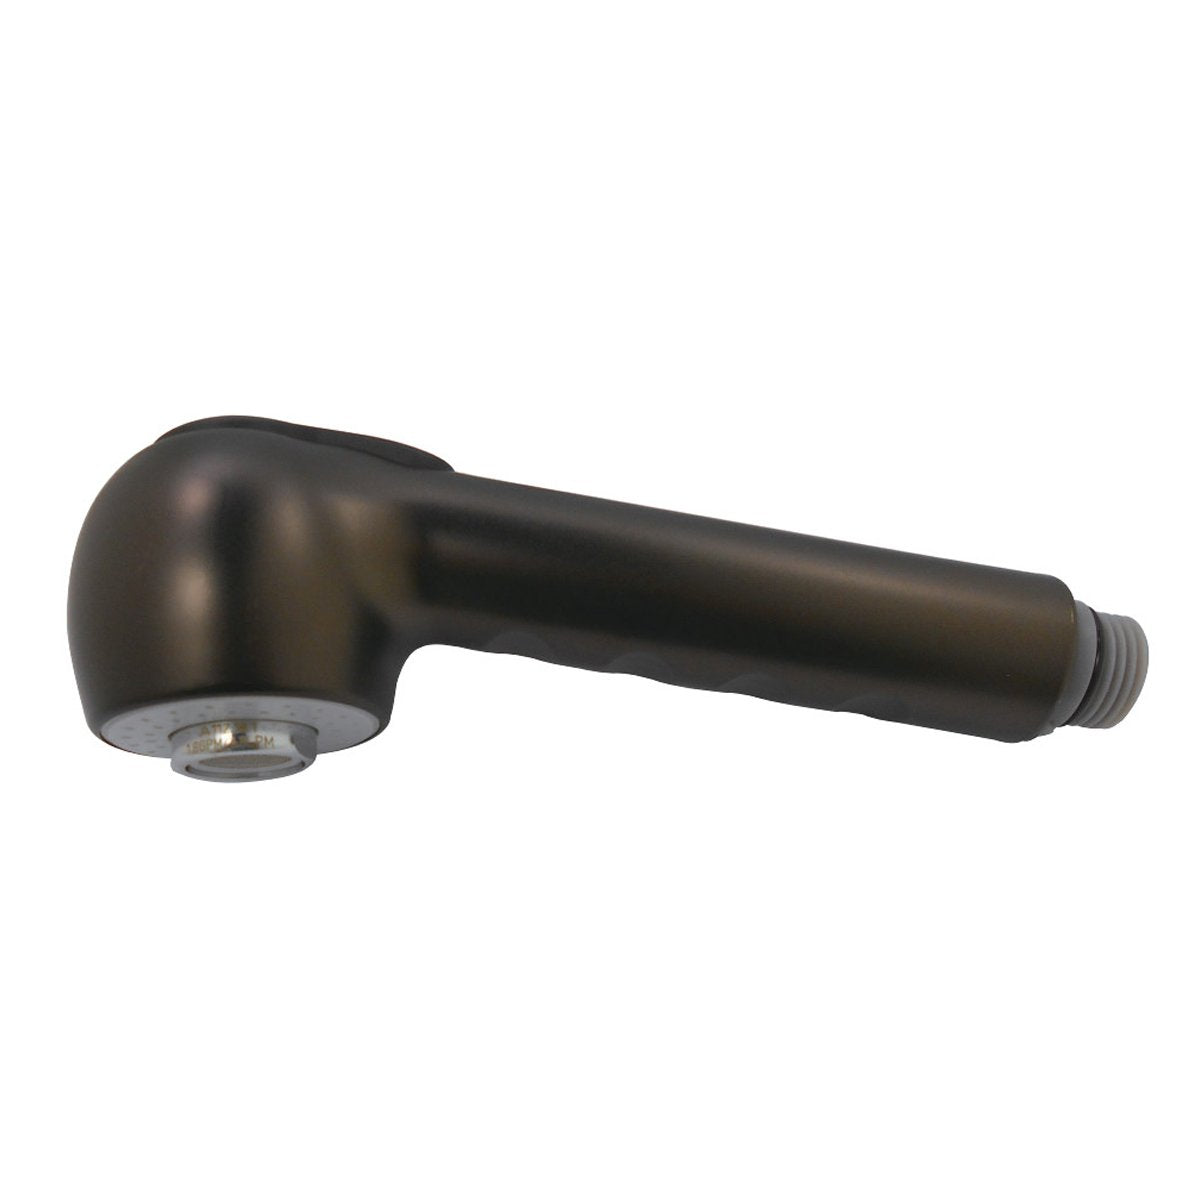 Kingston Brass Soft Button Pull-Out Kitchen Faucet Sprayer in Oil Rubbed Bronze